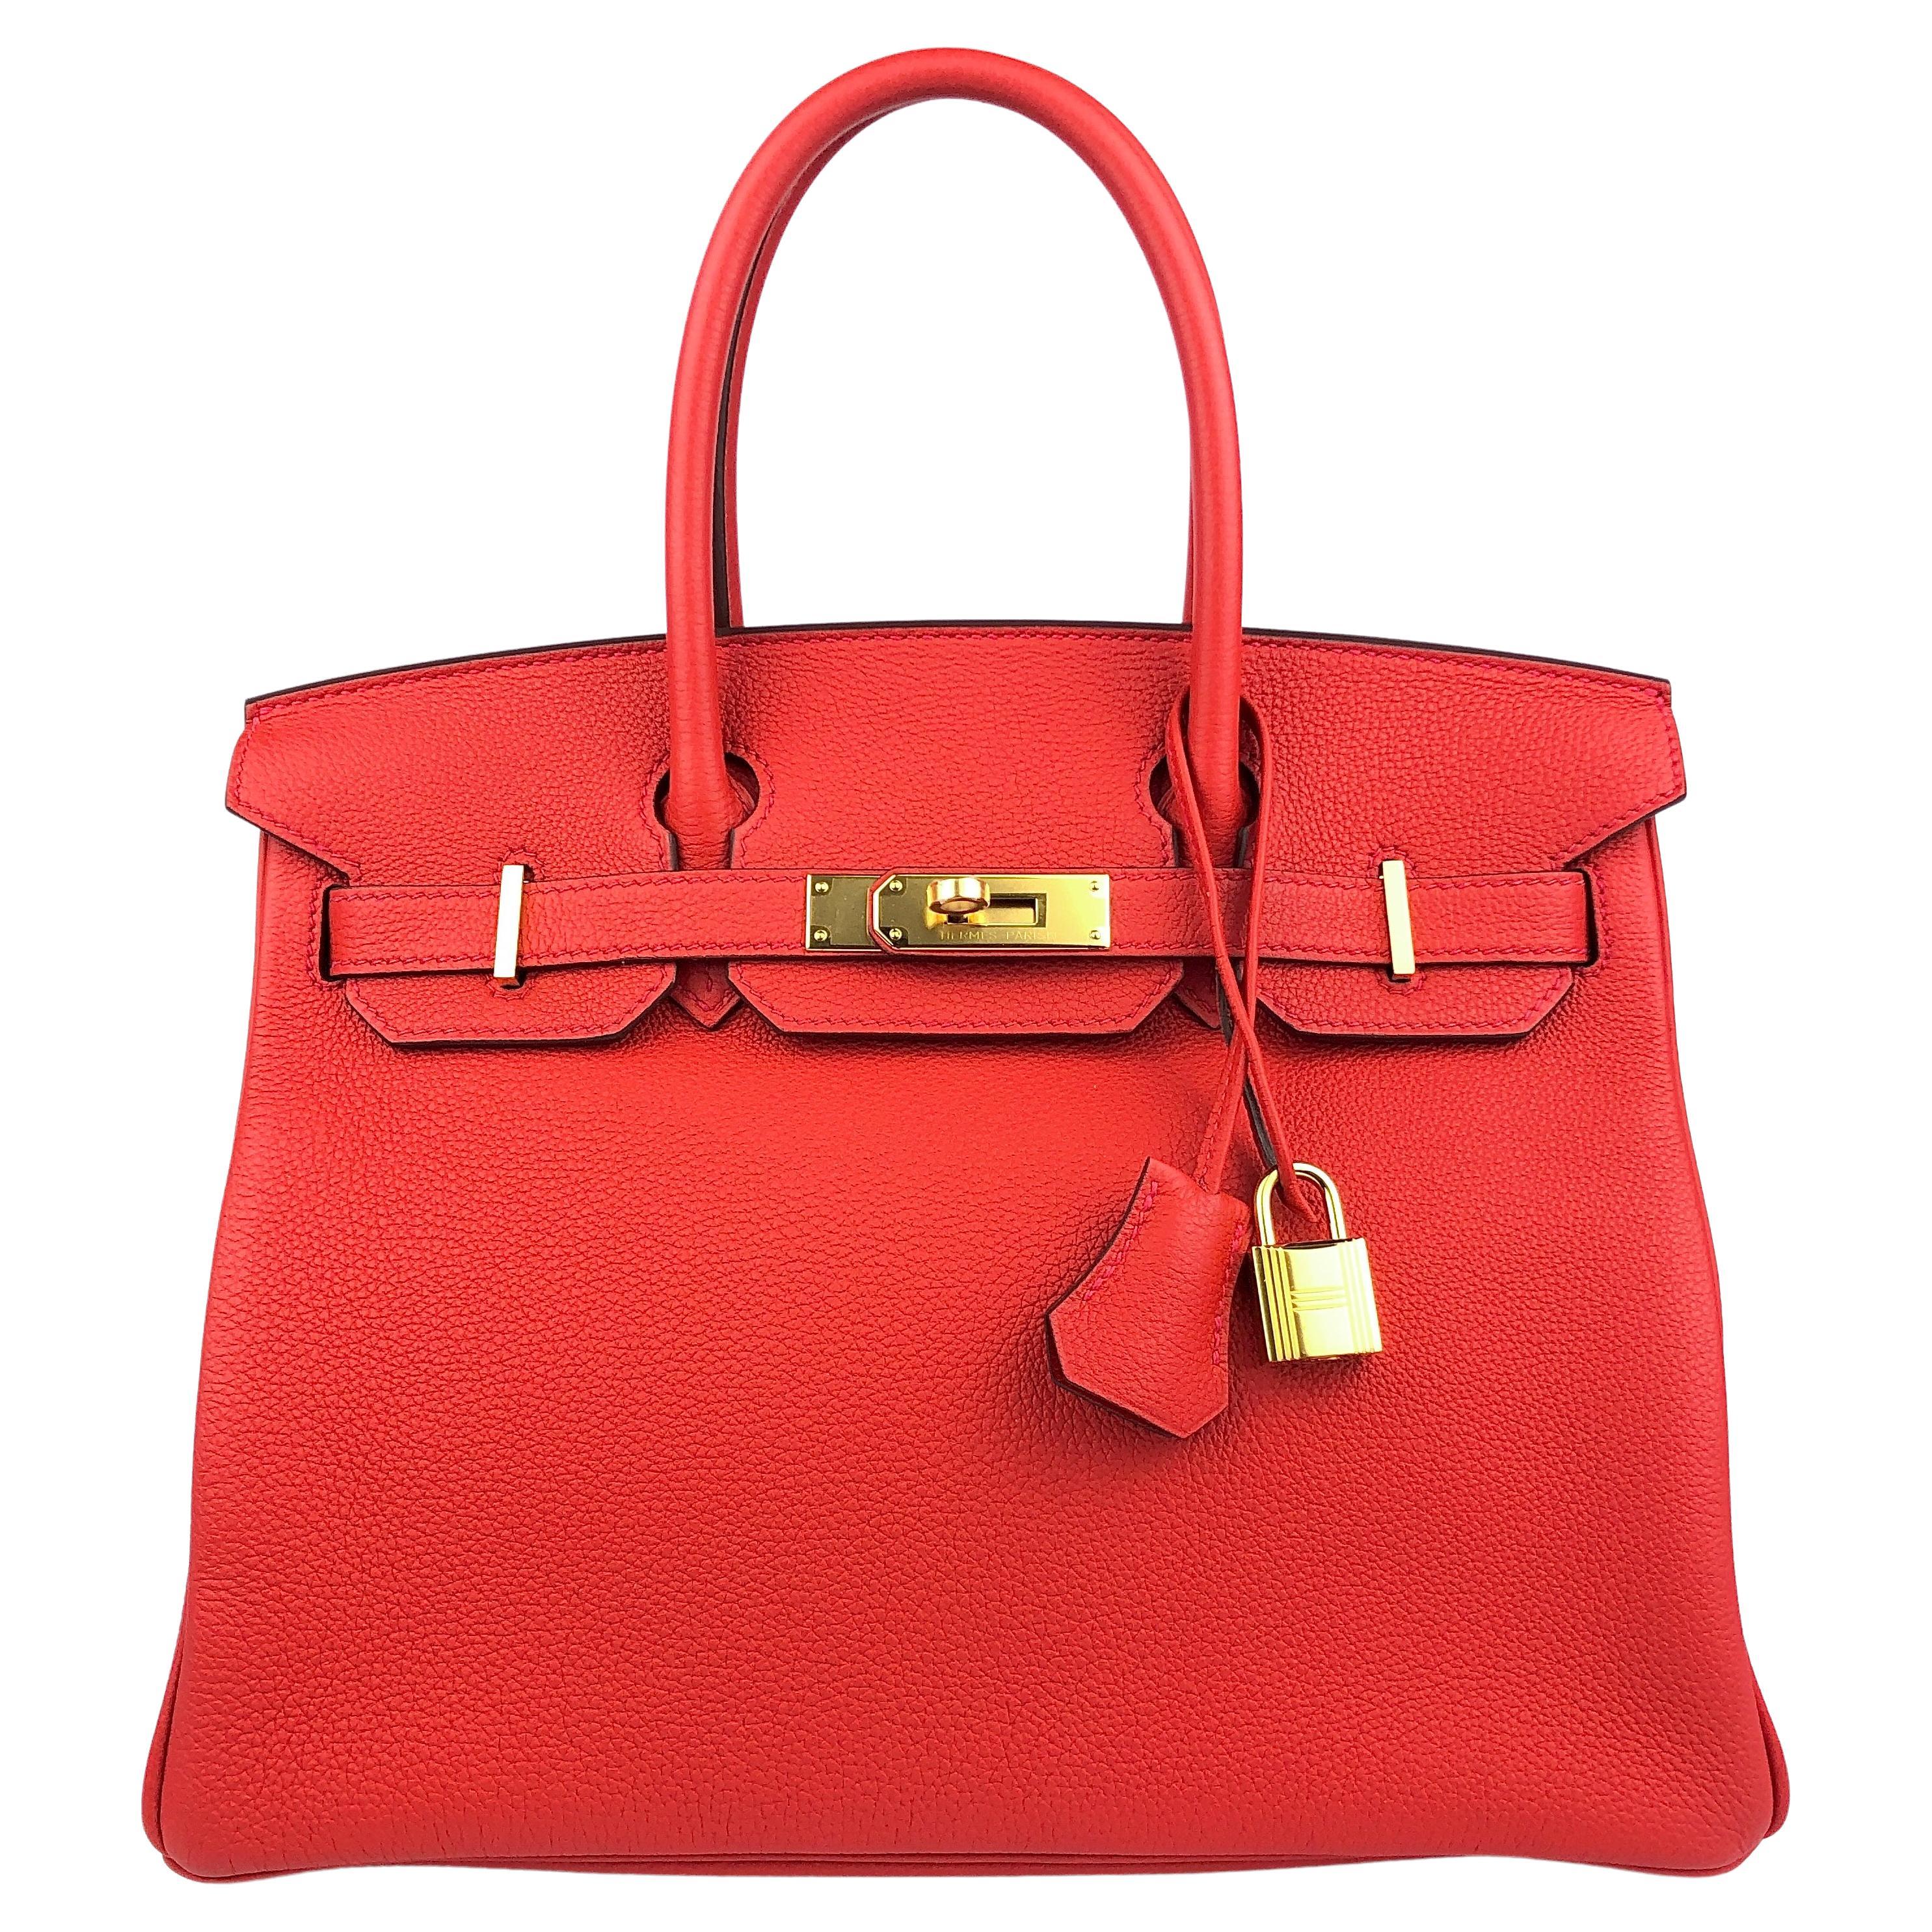 Hermès Birkin 30 Rouge Tomate Tomato Red Togo with Gold Hardware